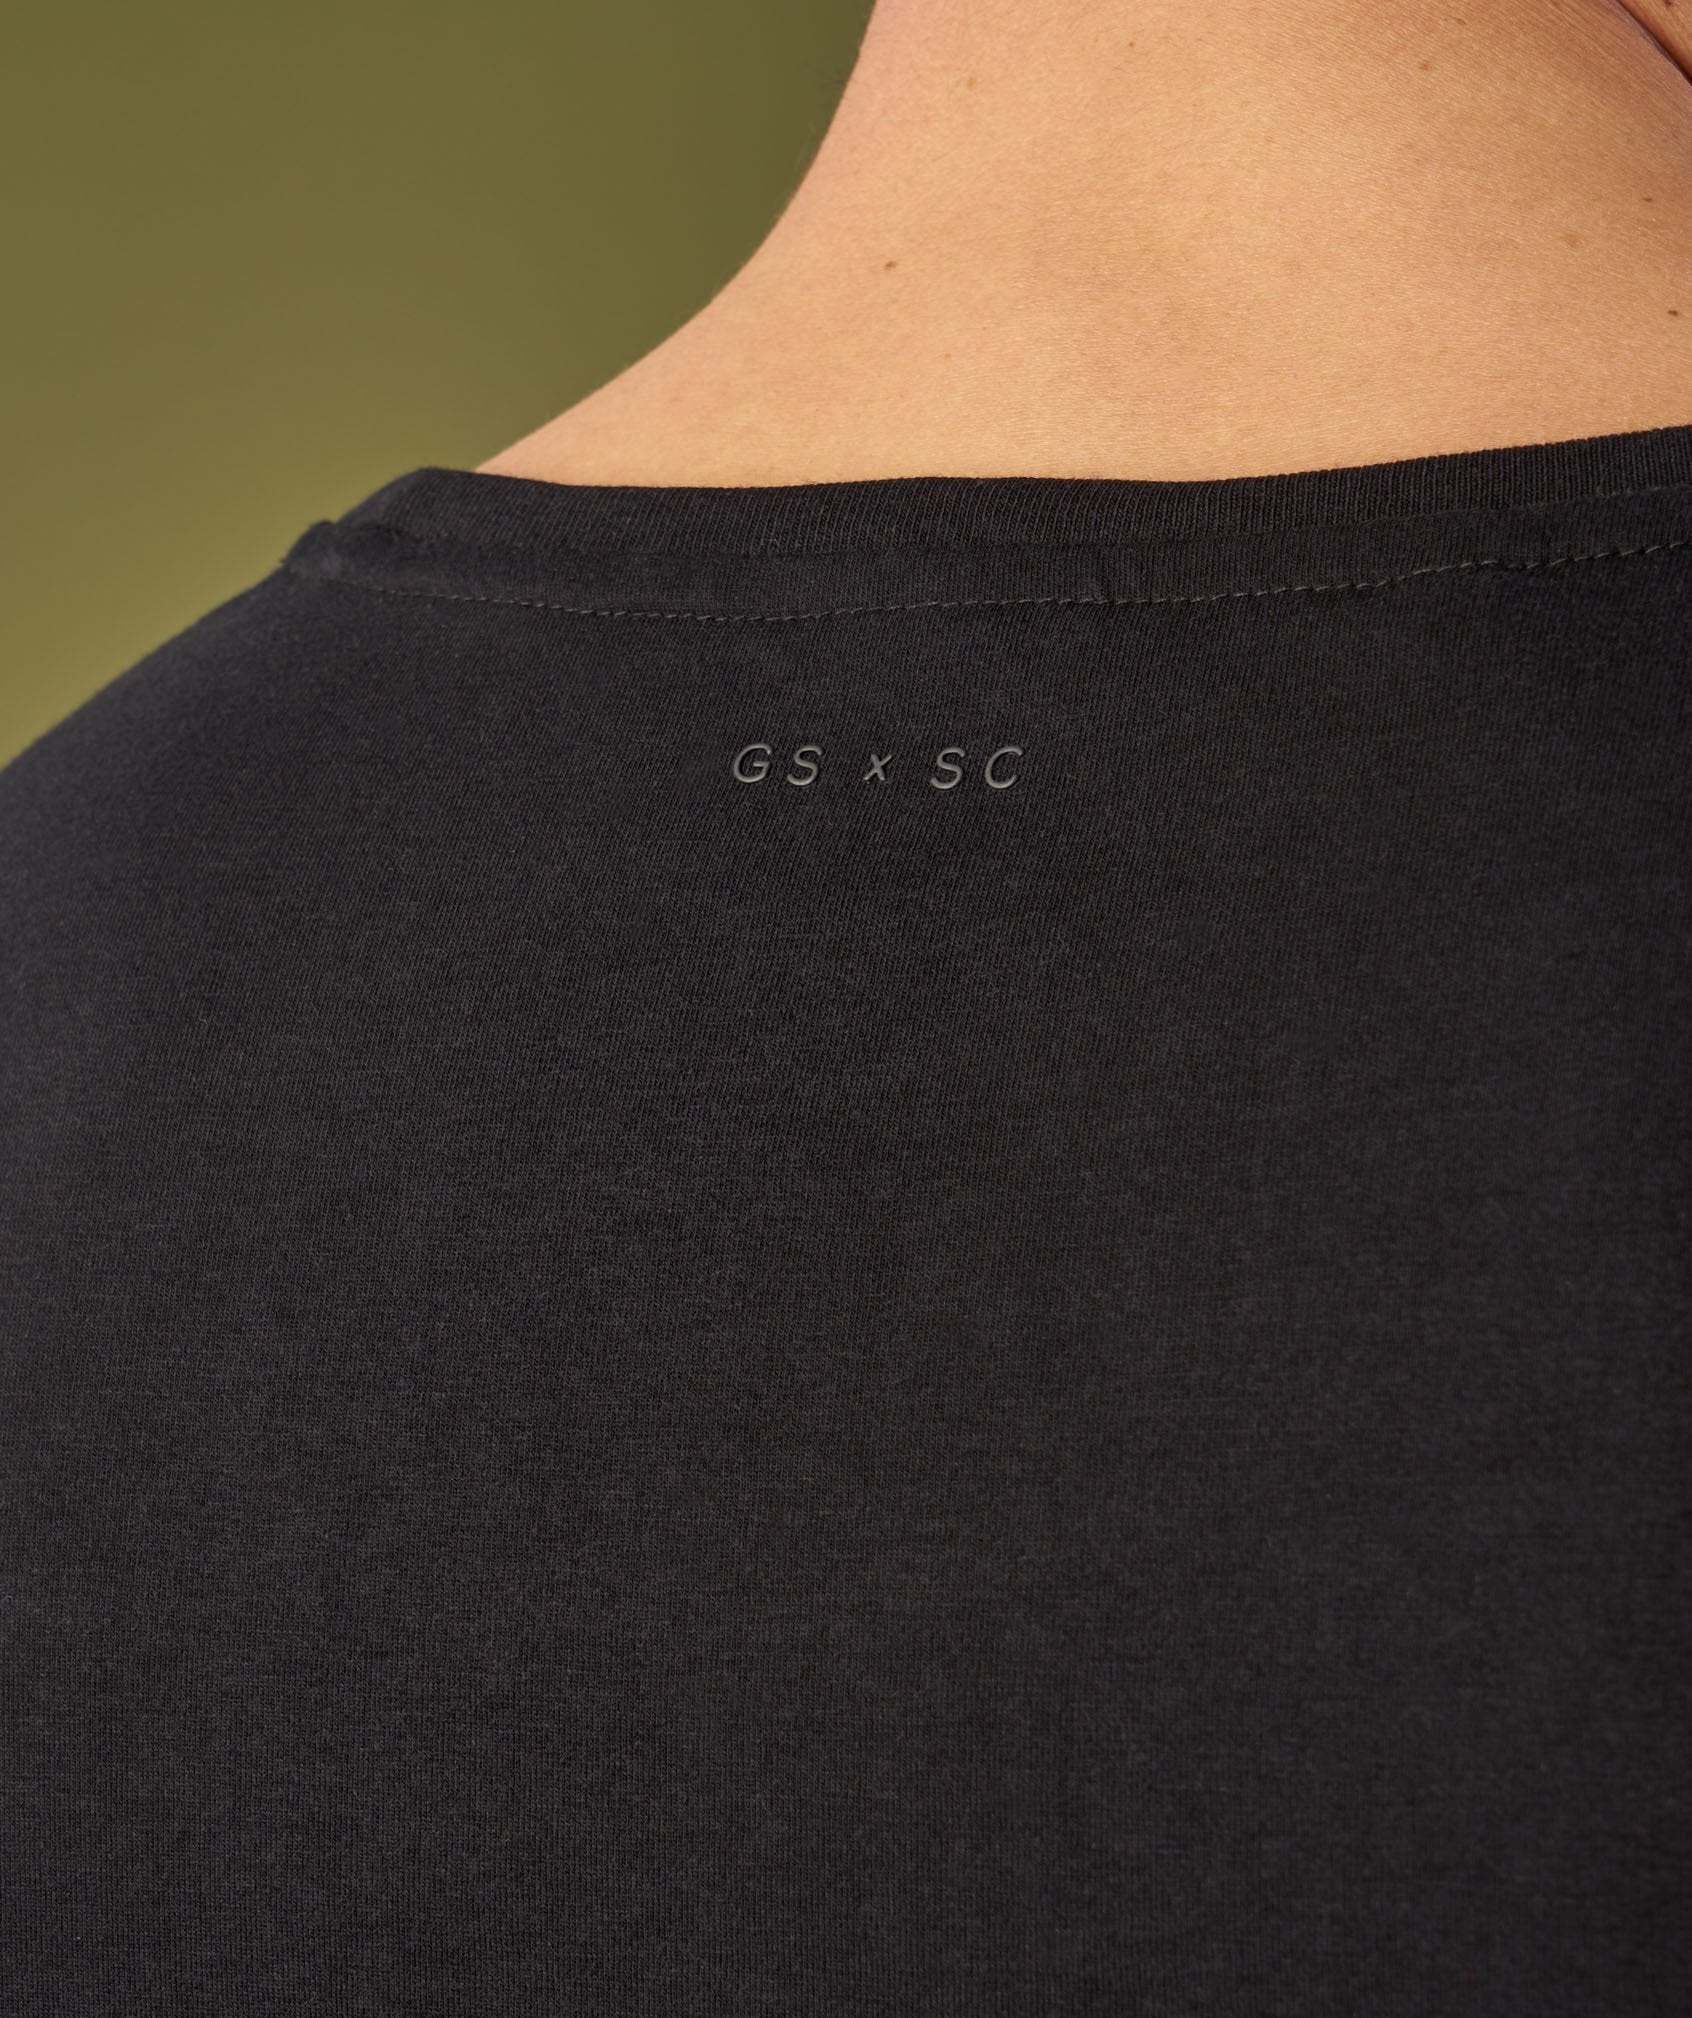 Raw 3/4 Sleeve T-Shirt in Black - view 5